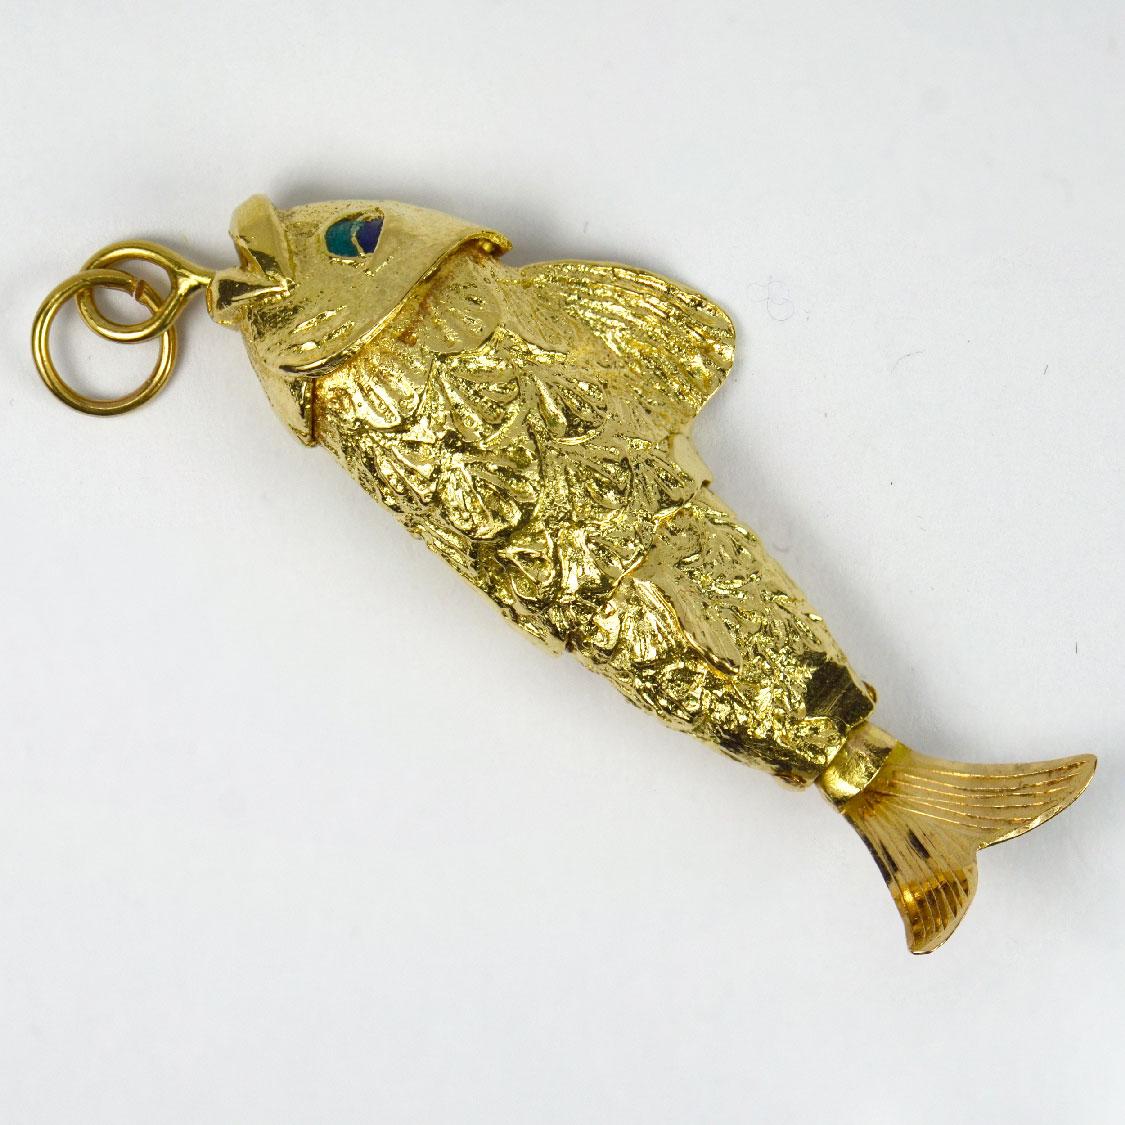 An 18 karat (18K) yellow gold charm pendant designed as a fish with an articulated flexible tail and enamel eyes. Unmarked but tested for 18 karat gold.

Dimensions: 5.9 x 1.9 x 1.05 cm (not including jump ring)
Weight: 14.78 grams 
